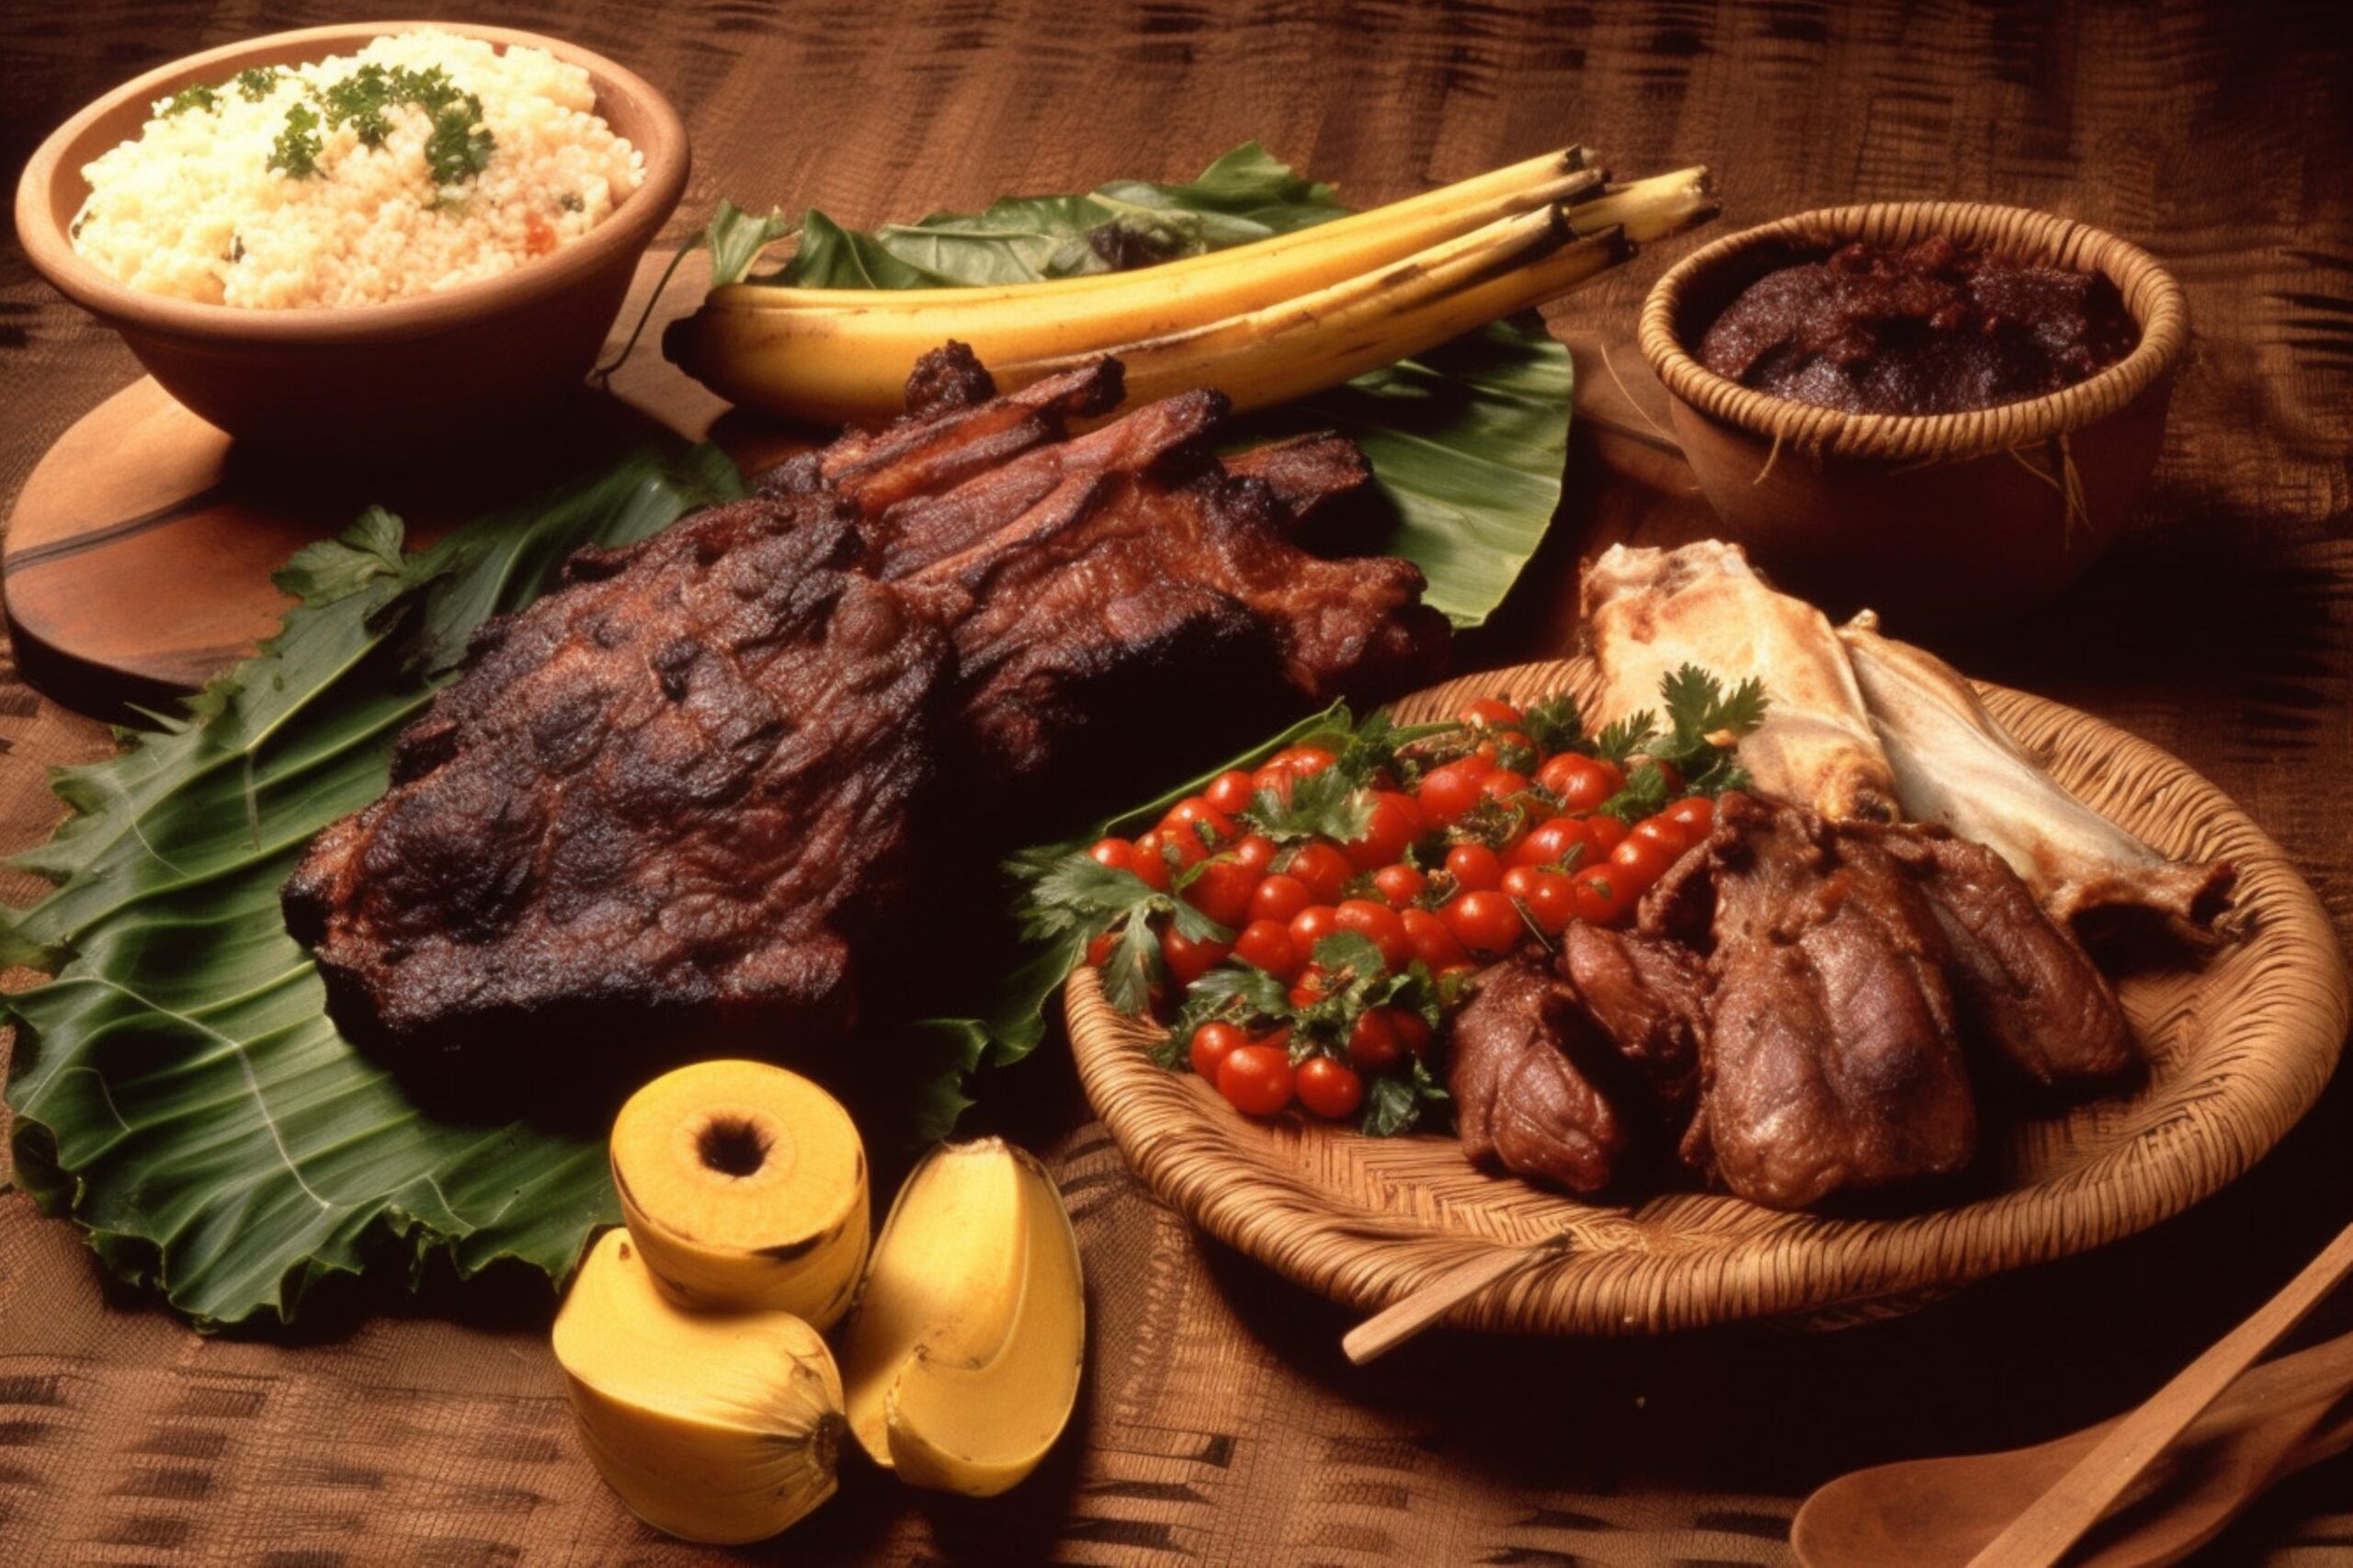 Image of assortment of meat, vegtables, and rice served on wooden plates and bowls